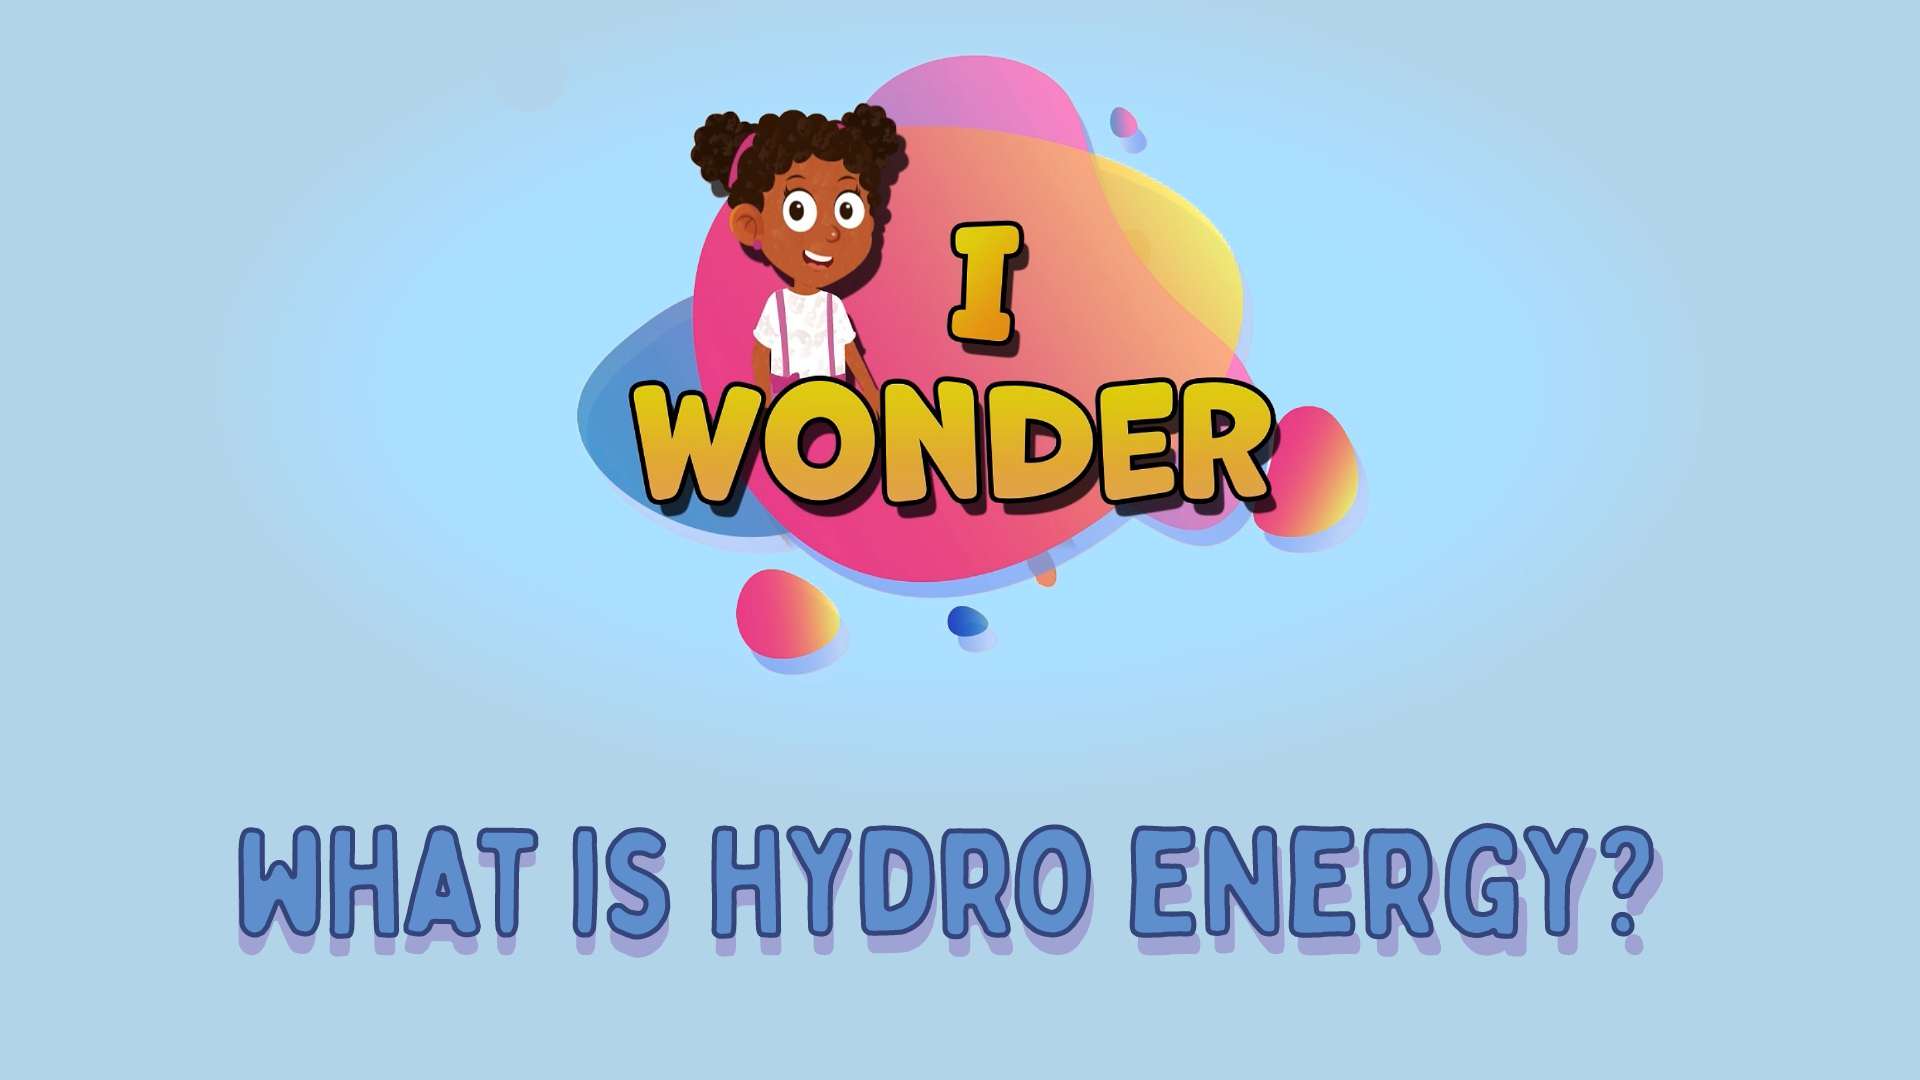 What Is Hydro Energy?